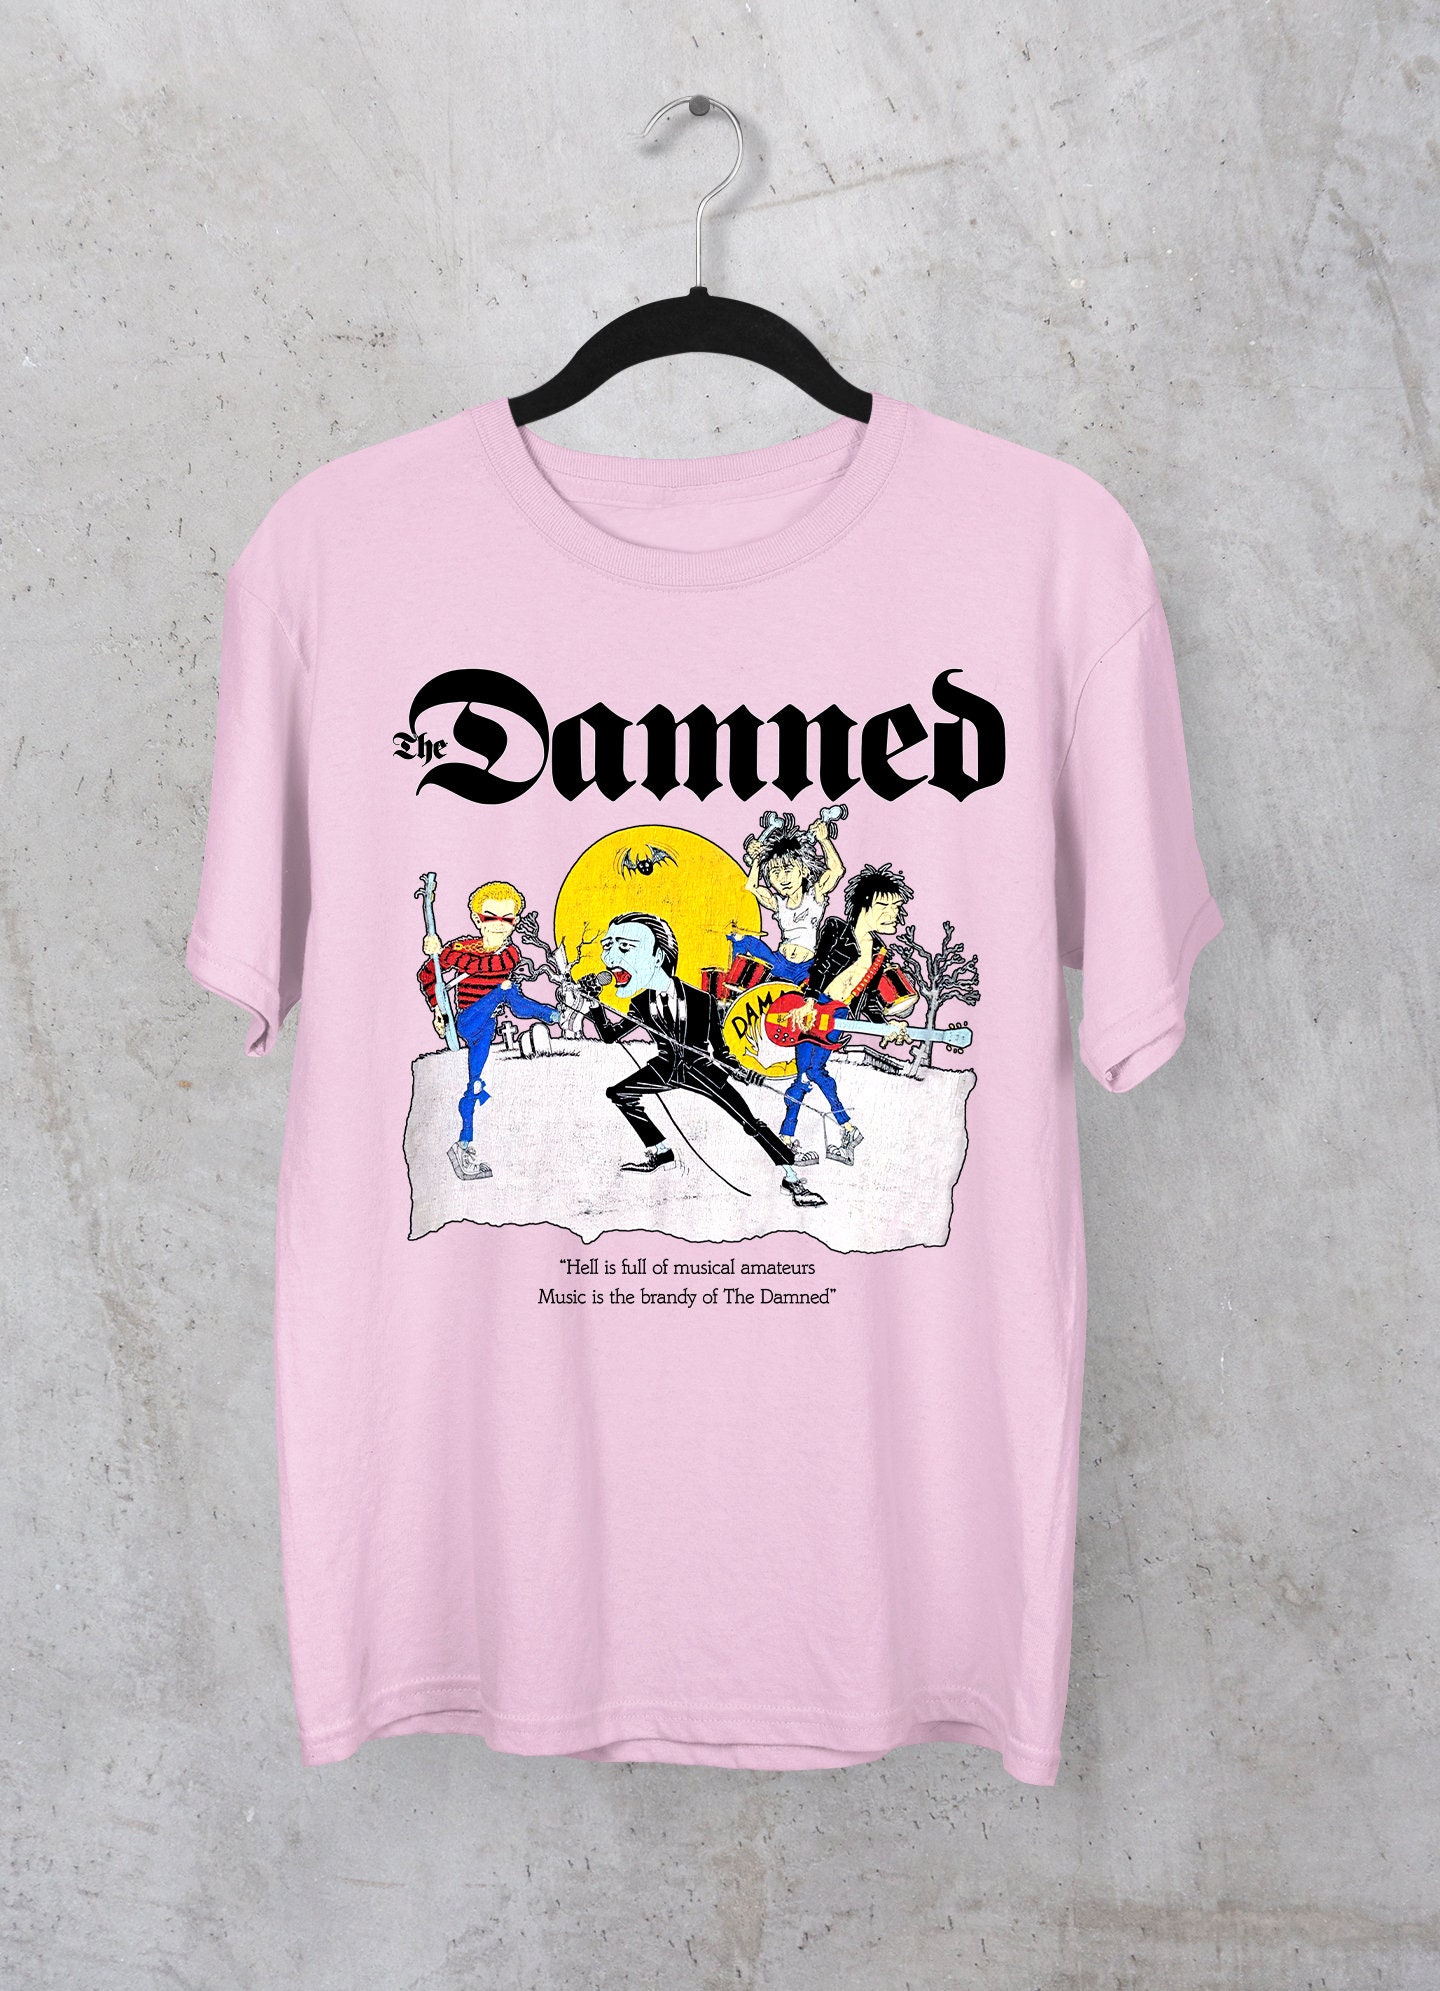 The Damned Tshirt Hell is Full of Musical Amateurs T-shirt